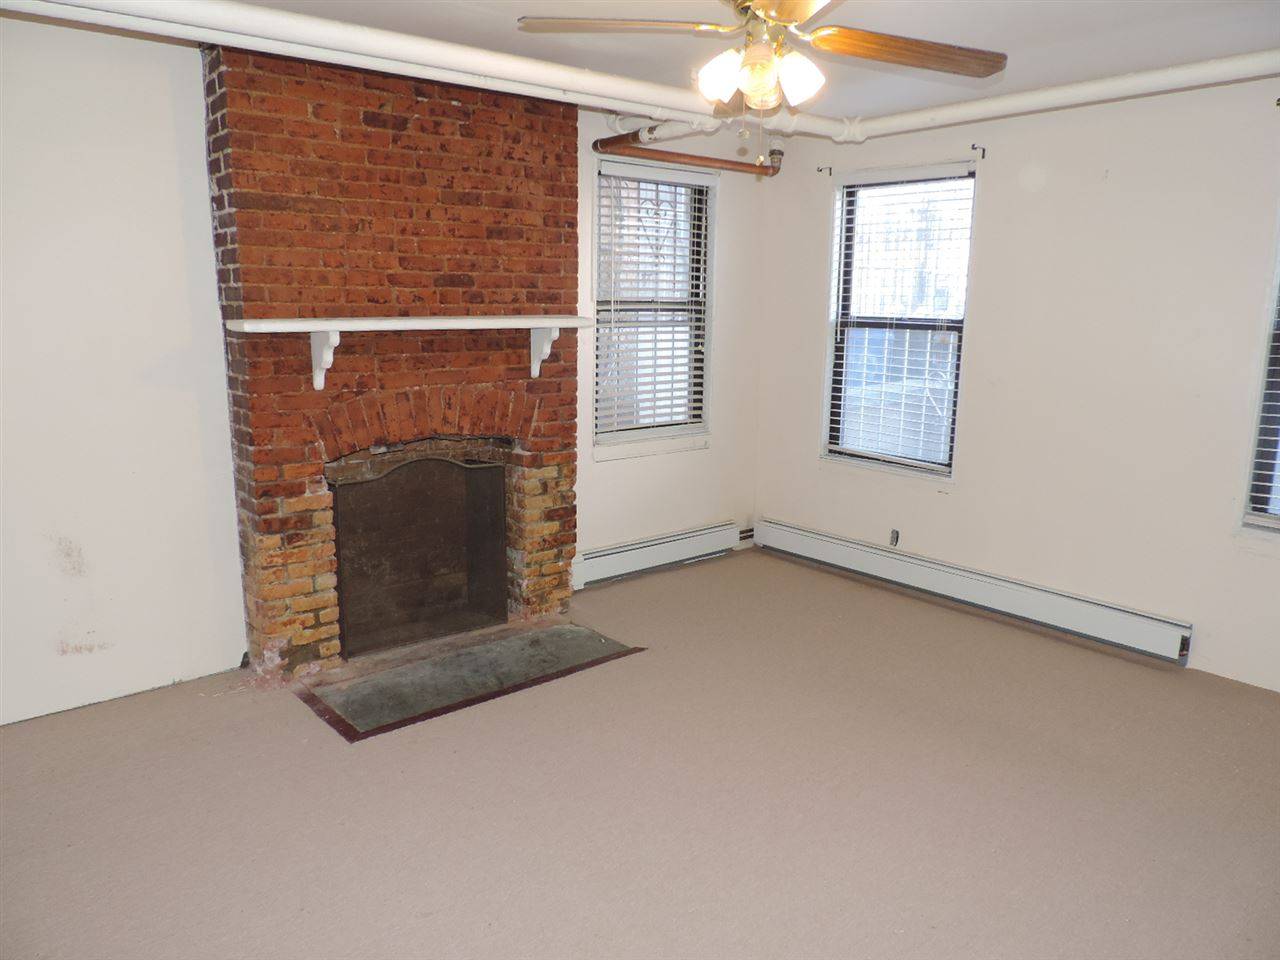 Spacious and bright 2B/1B rental with parking included